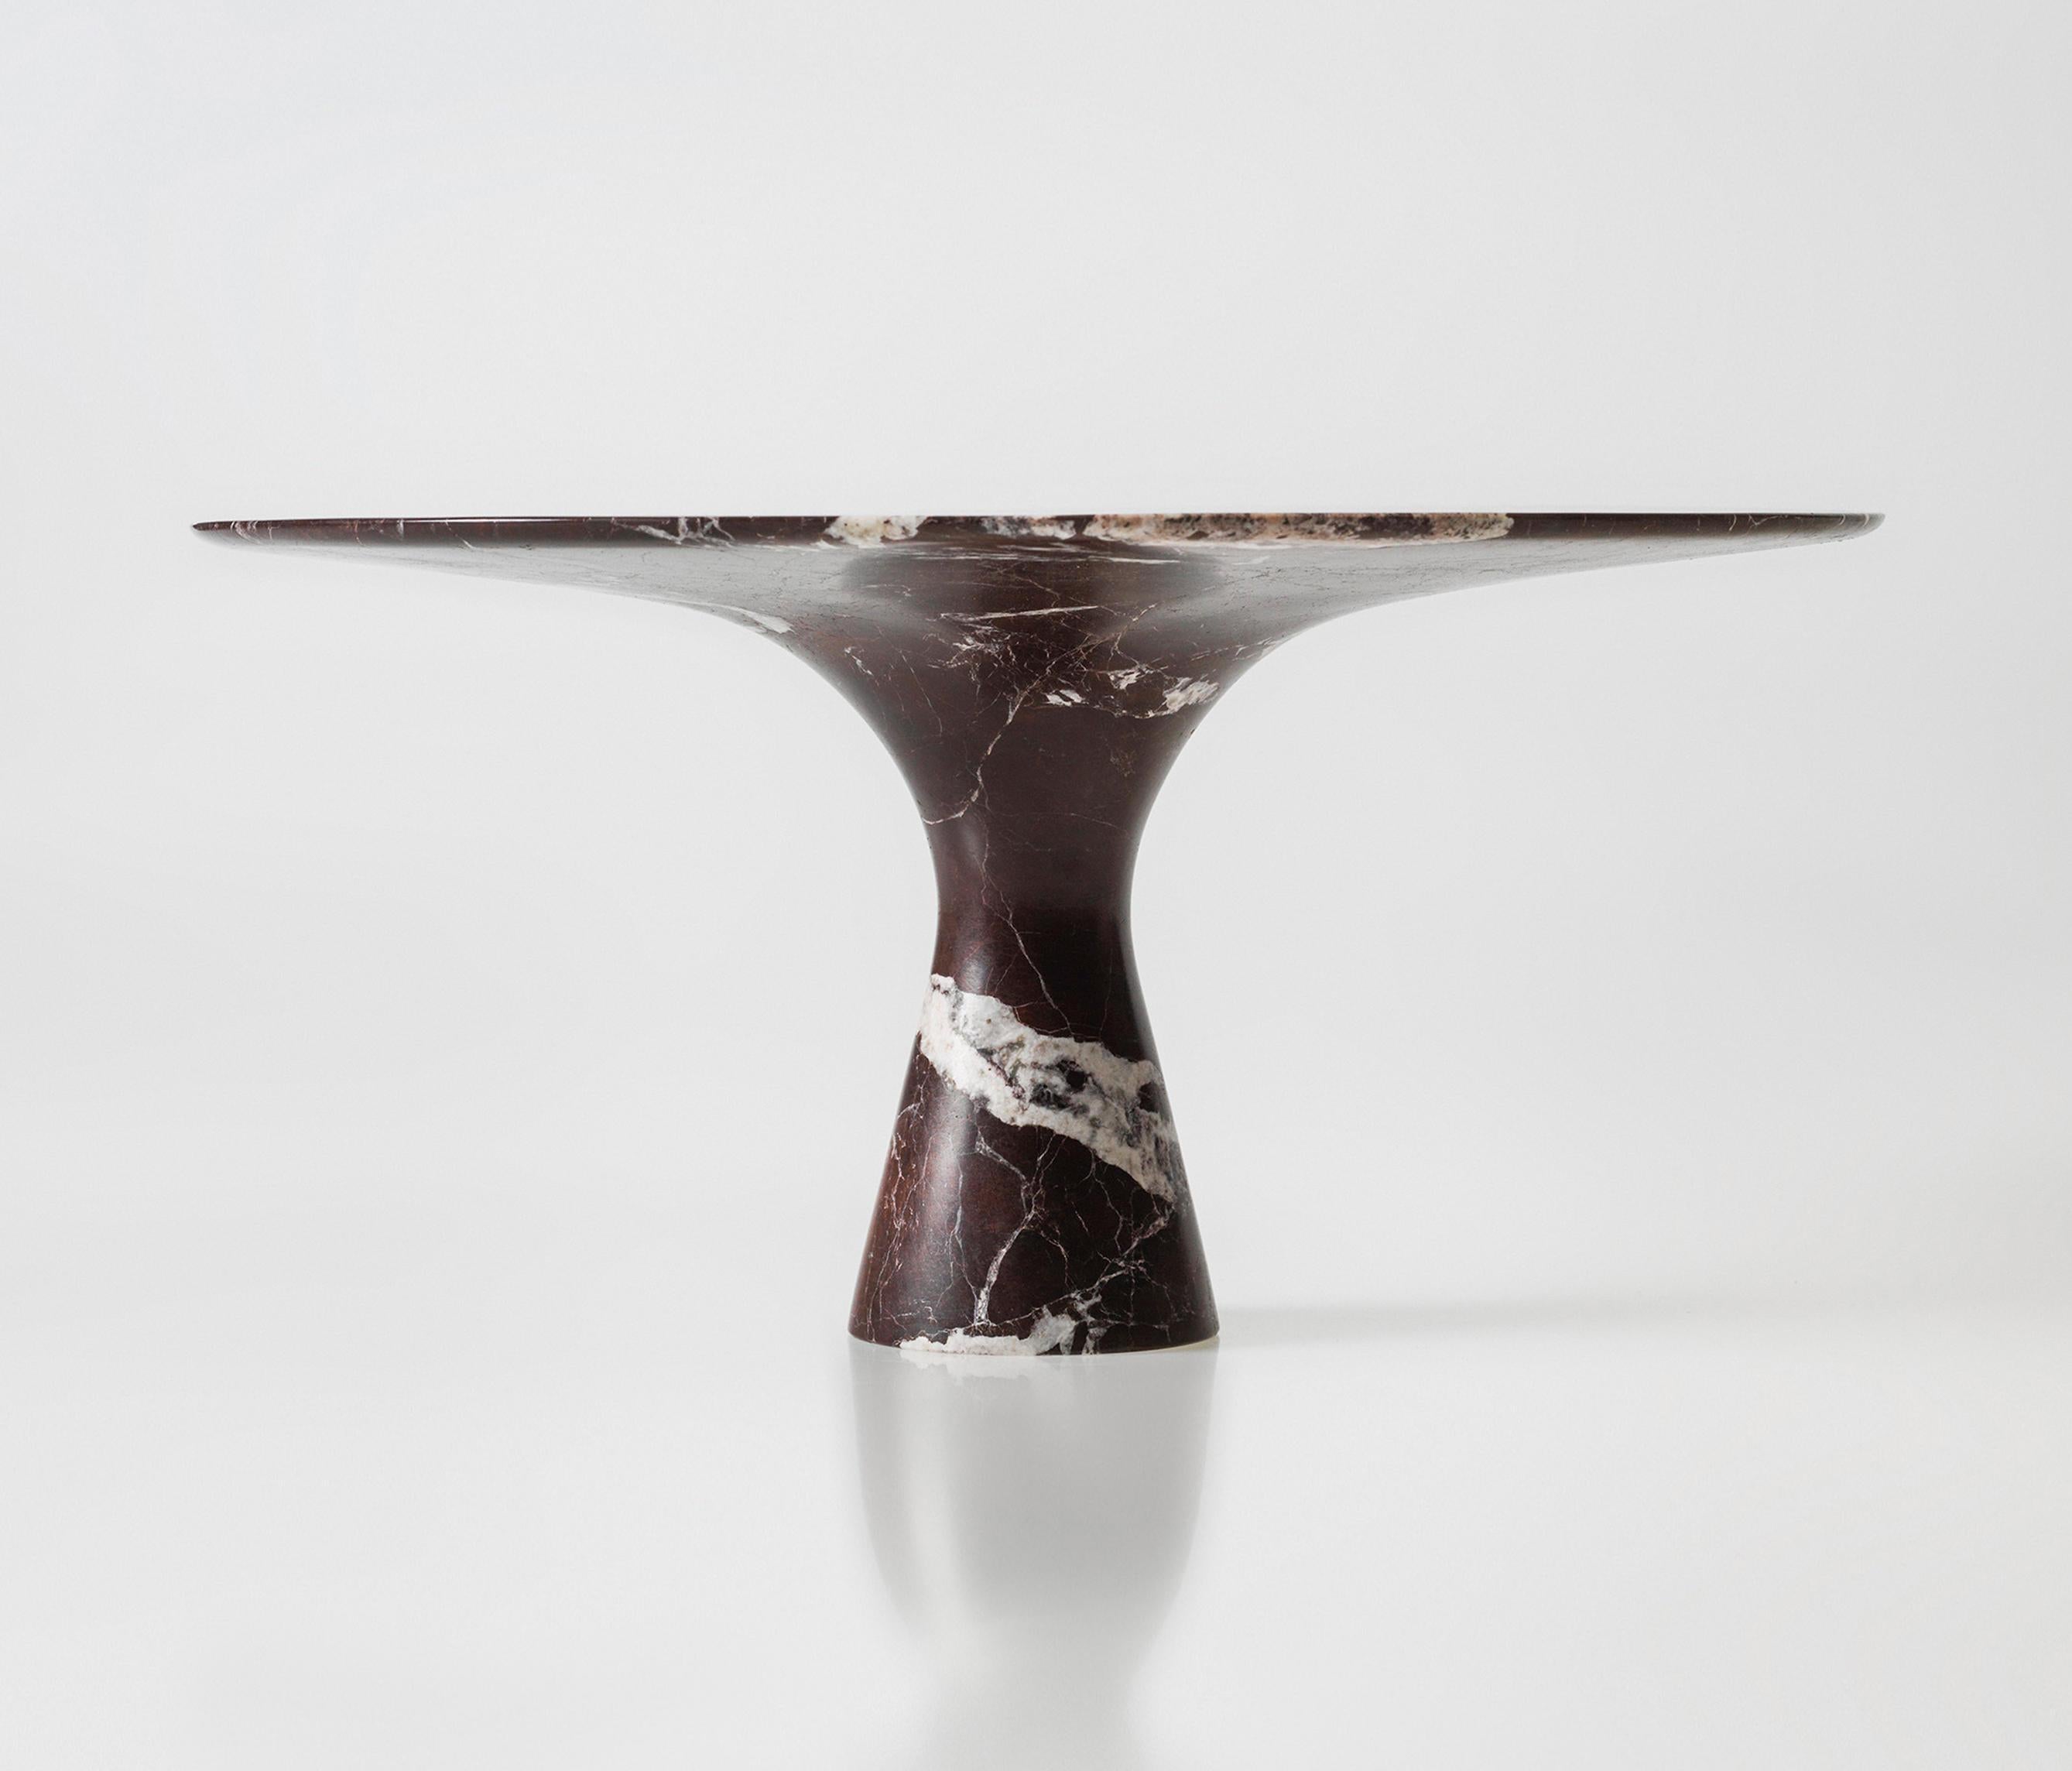 Rosso Lepanto Refined Contemporary Marble Oval Table 210/75
Dimensions: 210 x 75 cm
Materials: Rosso Lepanto

Angelo is the essence of a round table in natural stone, a sculptural shape in robust material with elegant lines and refined